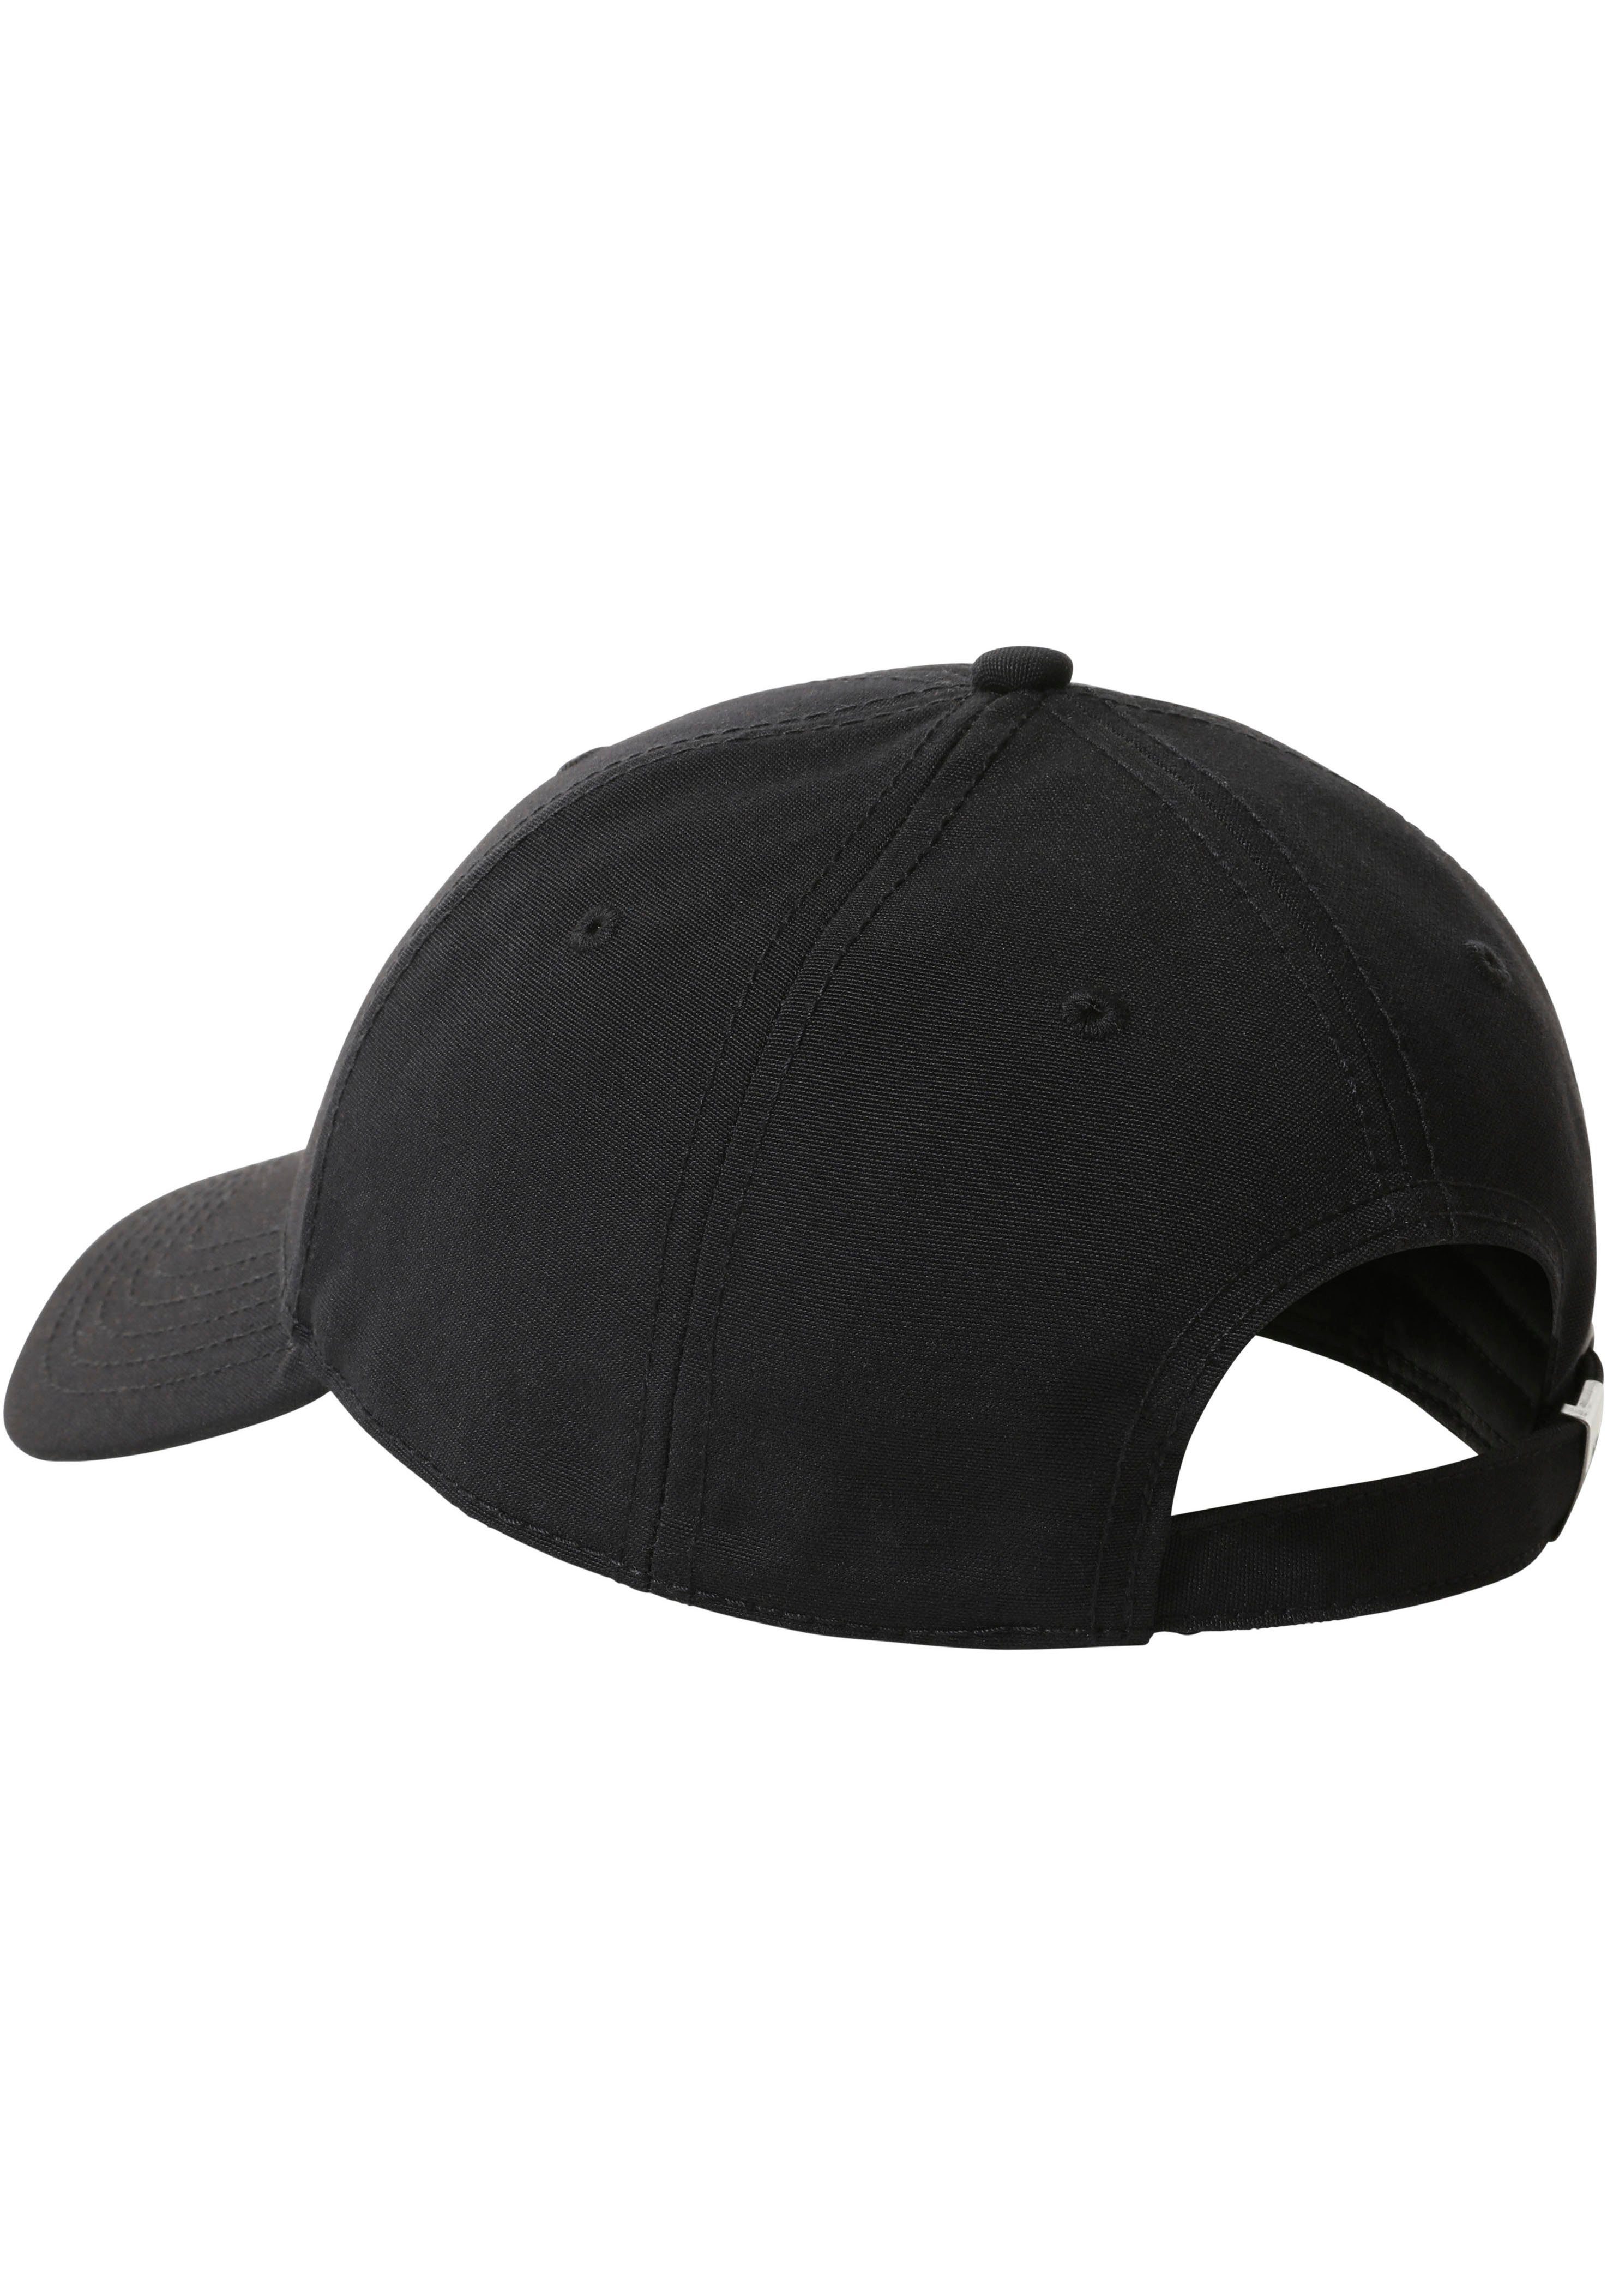 The North Face Baseball Cap CLASSIC schwarz 66 HAT RECYCLED